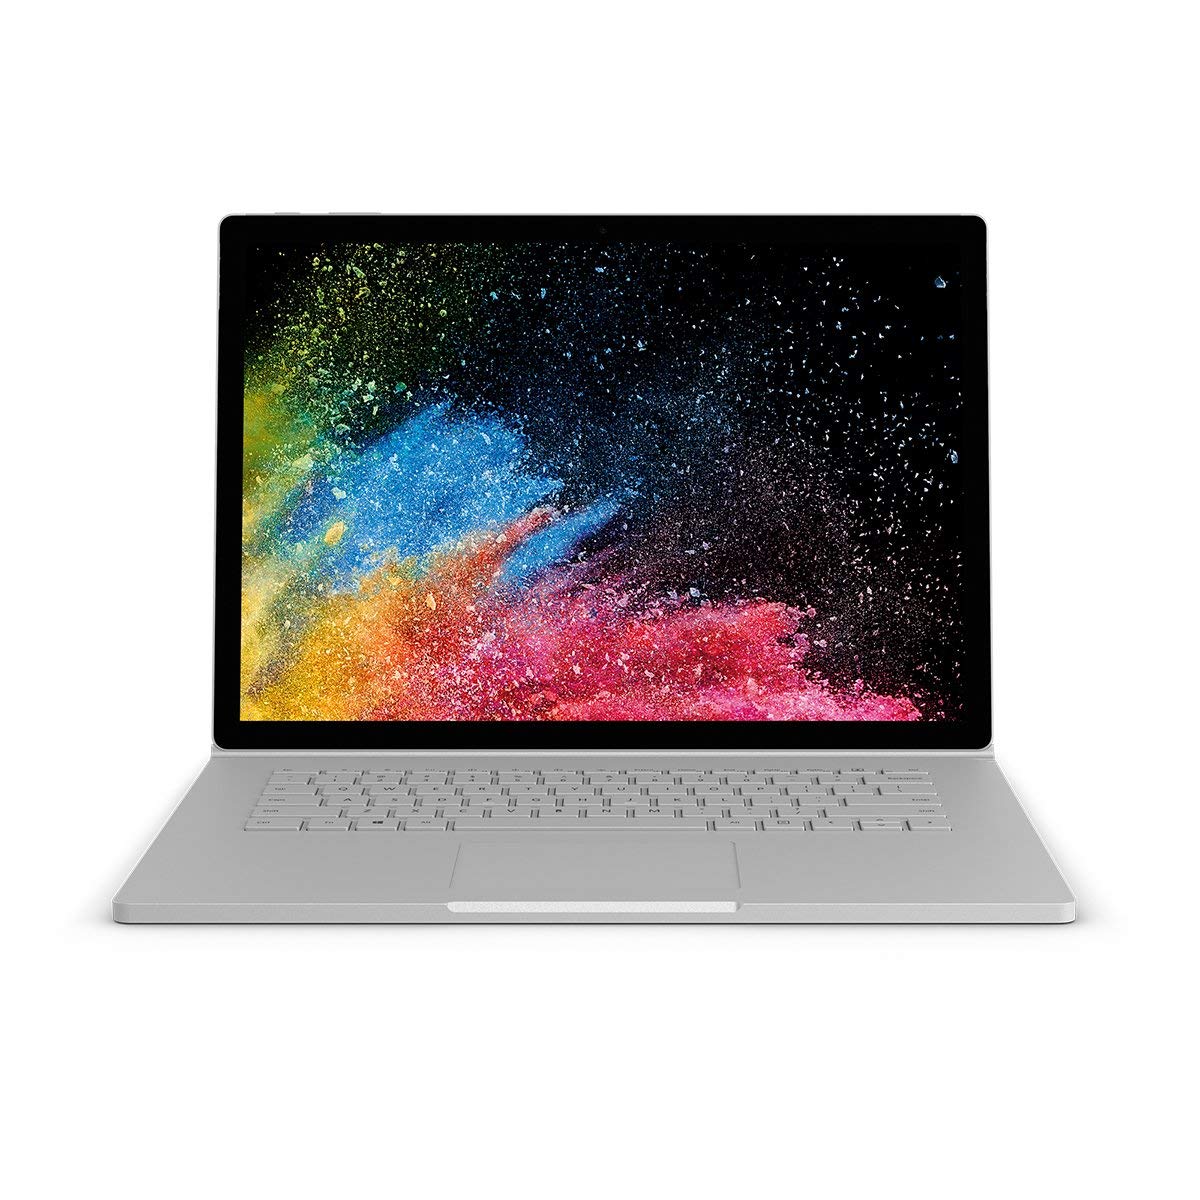 Best Laptops For Graphic Design 2021 Best Laptops for Graphic Designers in 2020 | JUST™ Creative